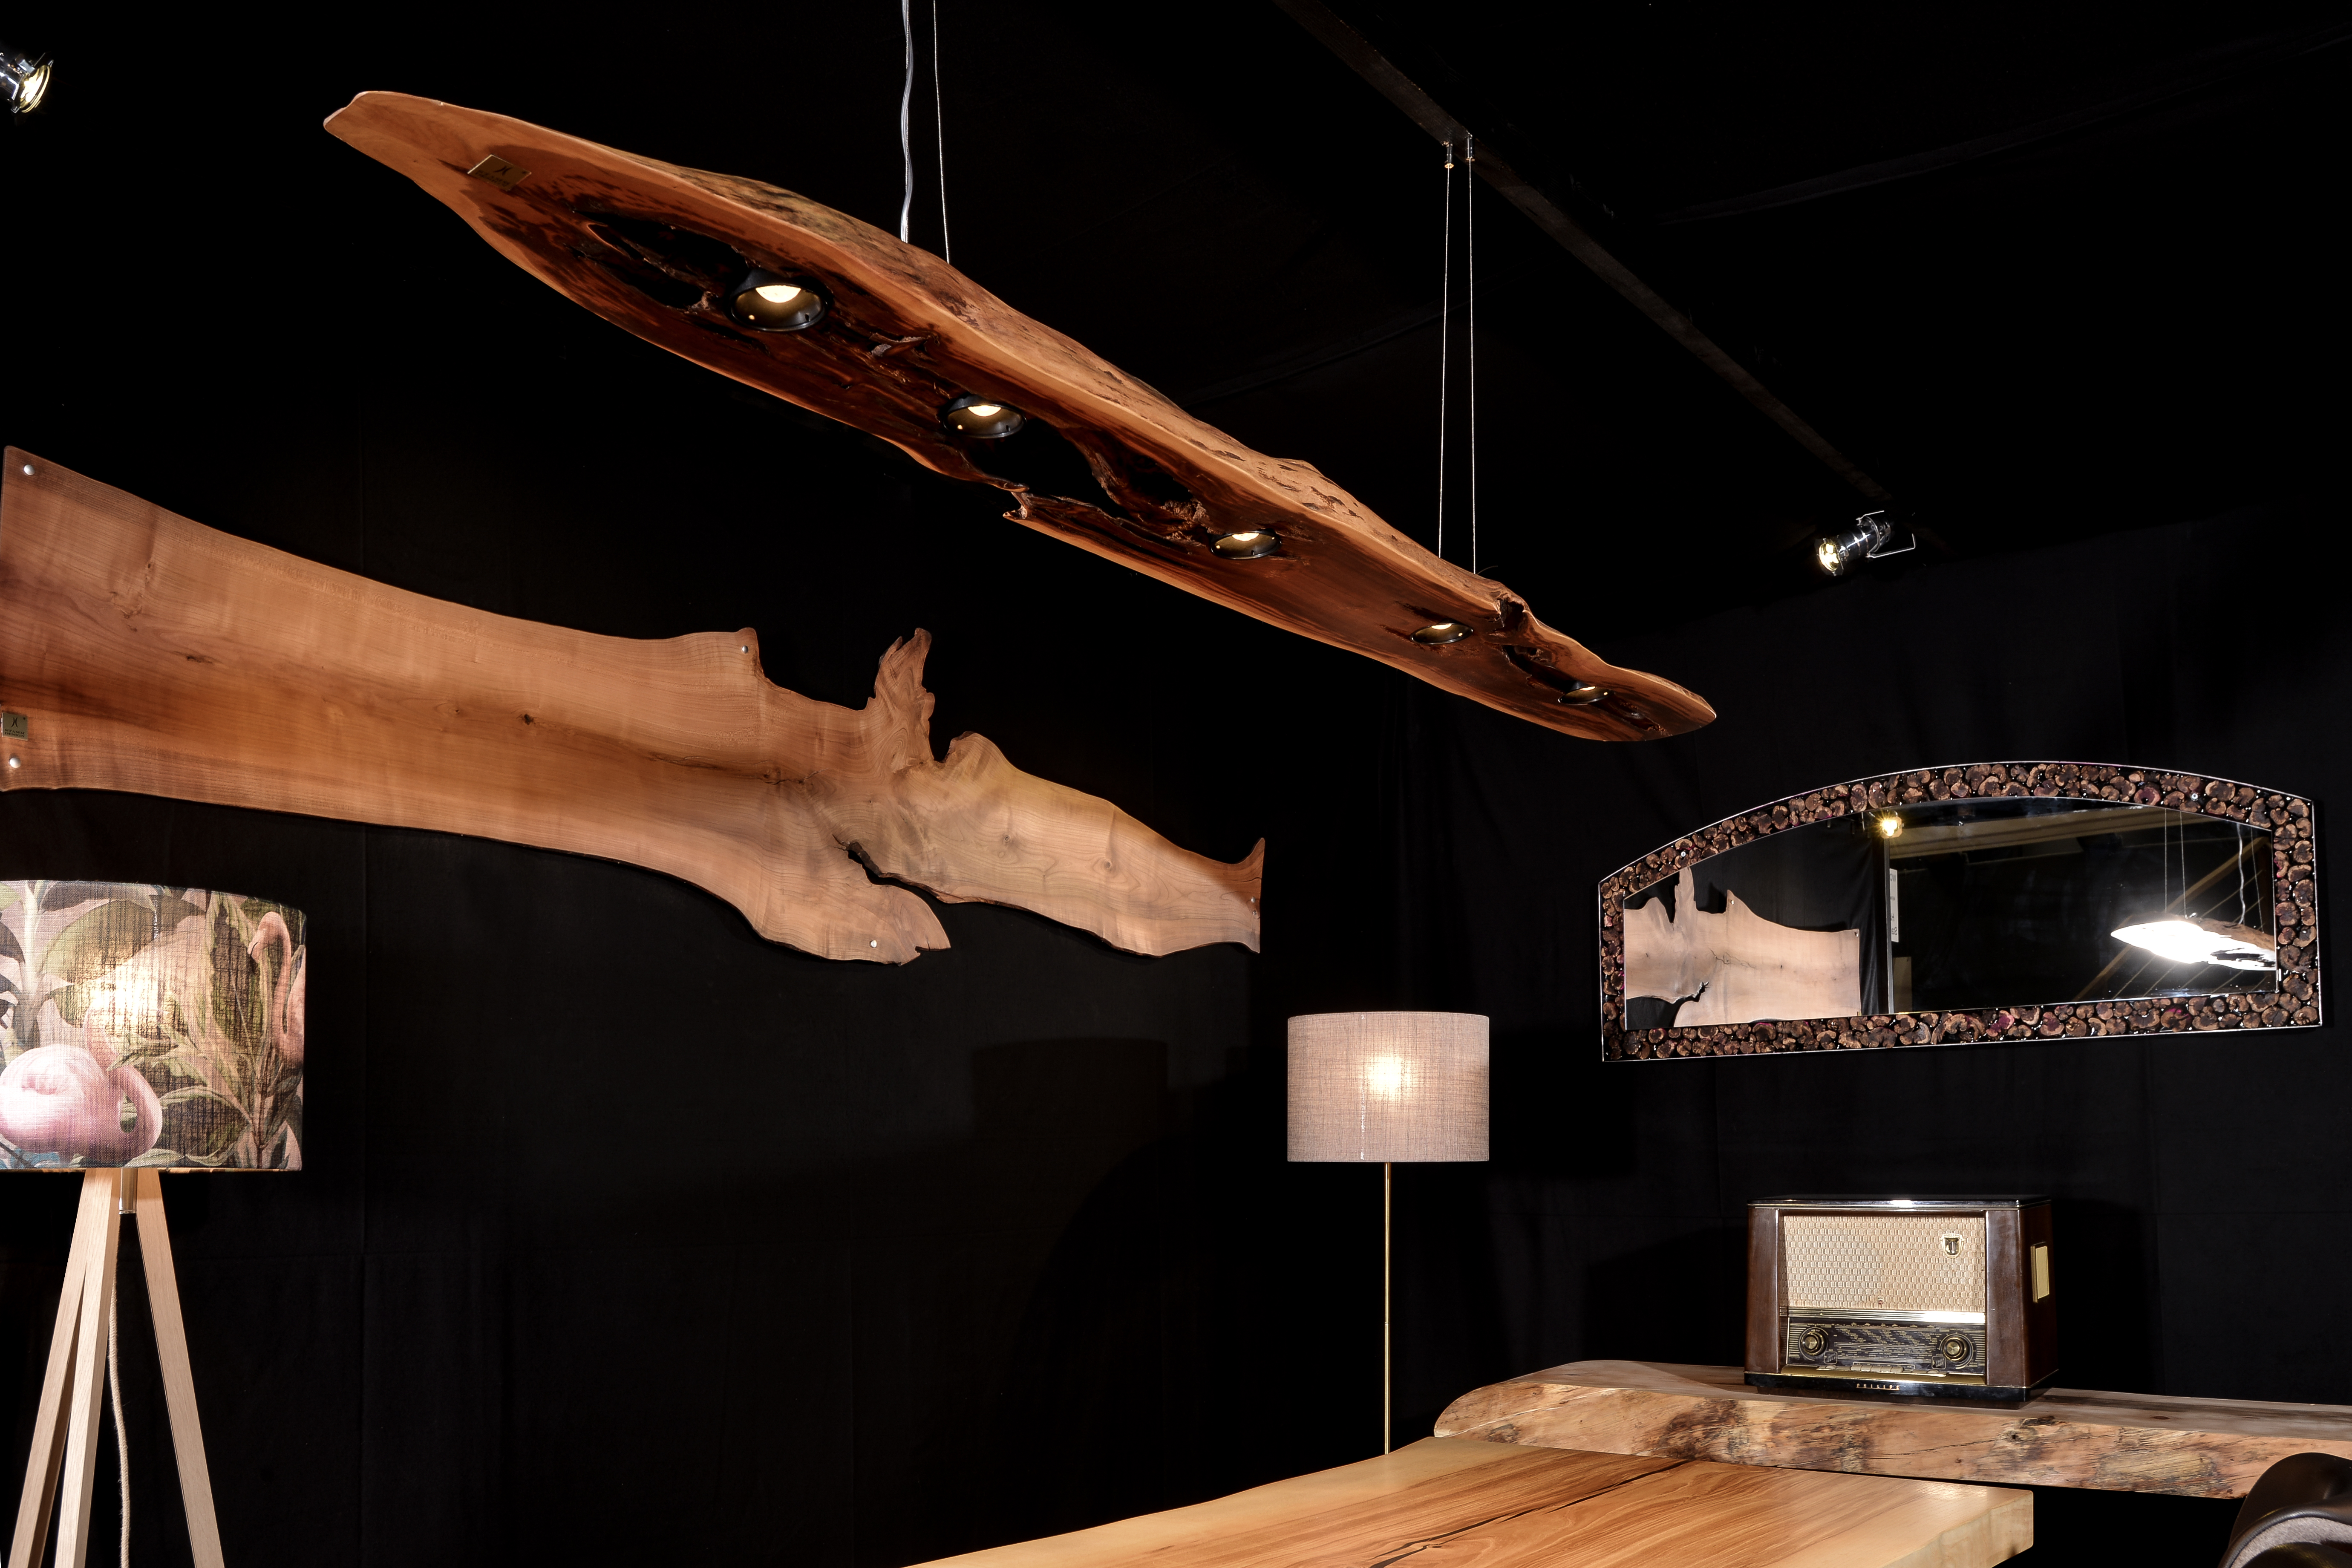 Designer lamp from a tree trunk